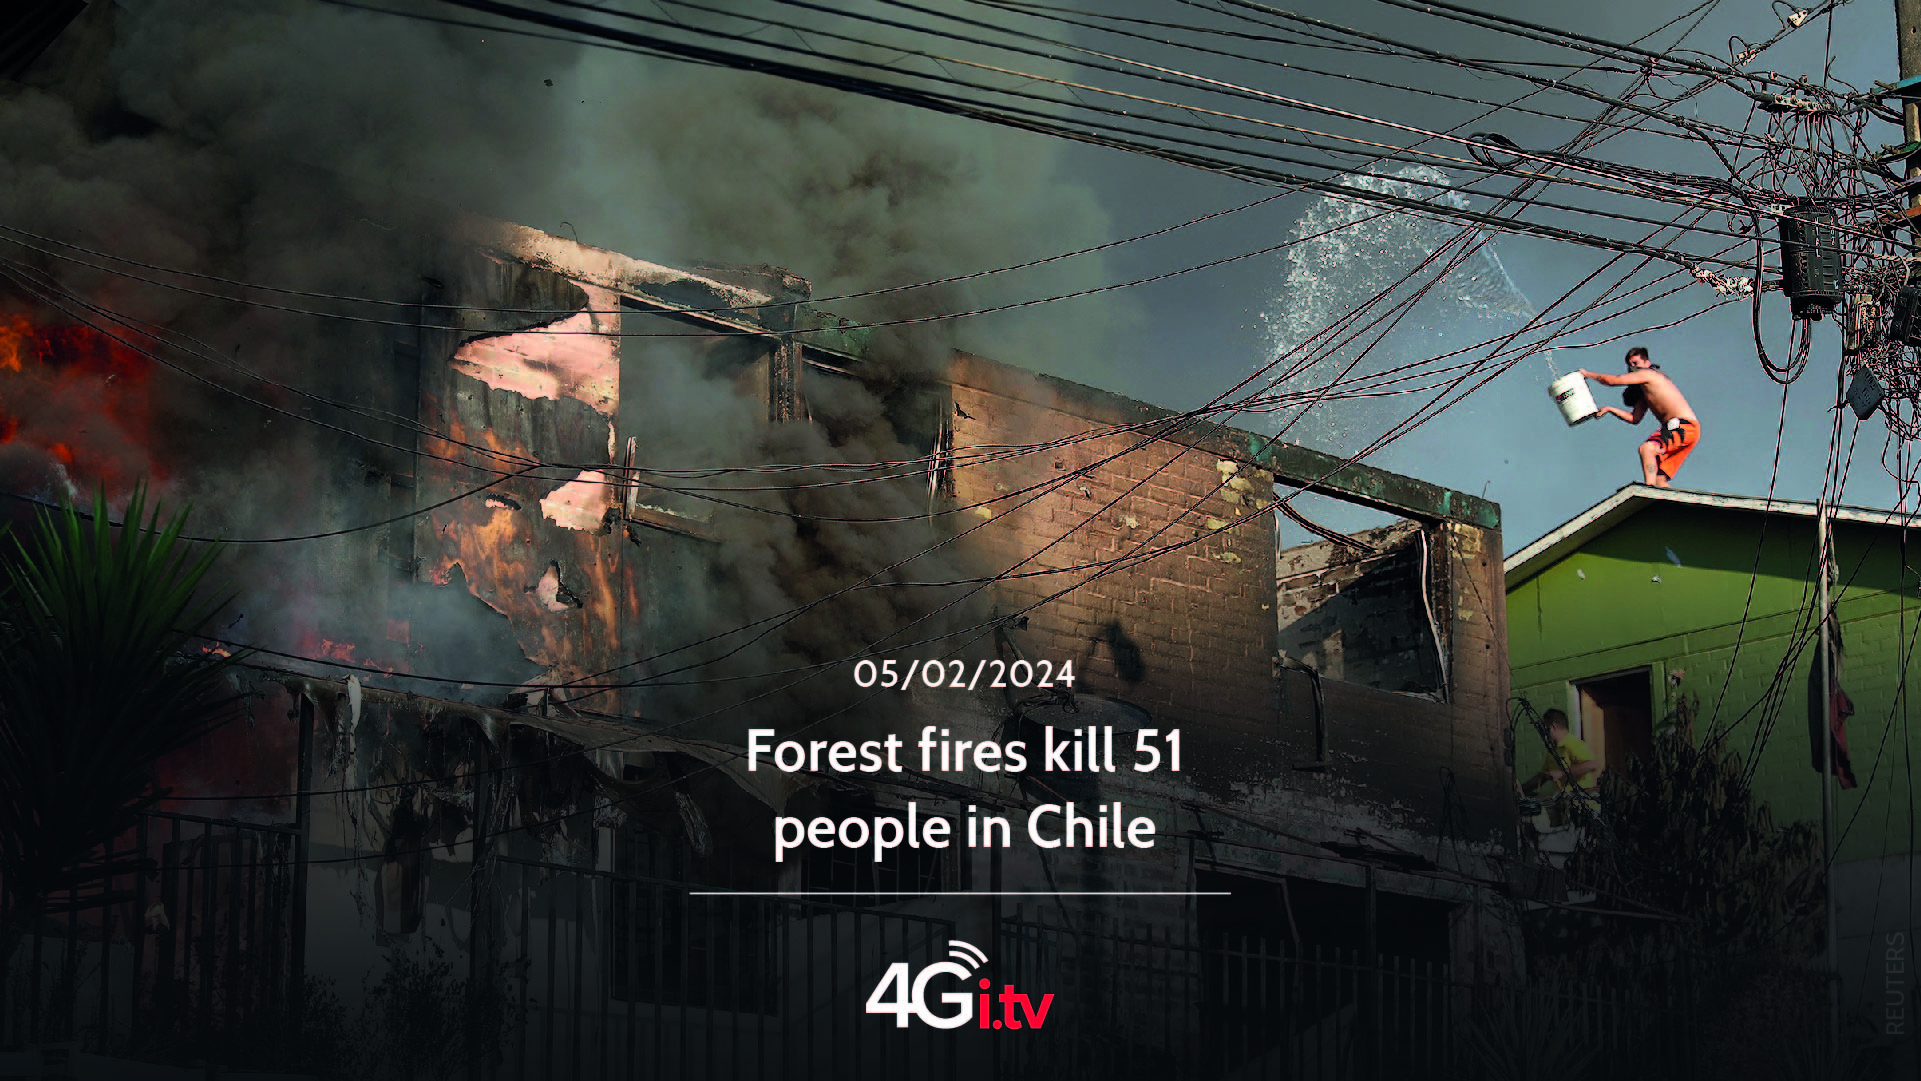 Подробнее о статье Forest fires kill 51 people in Chile